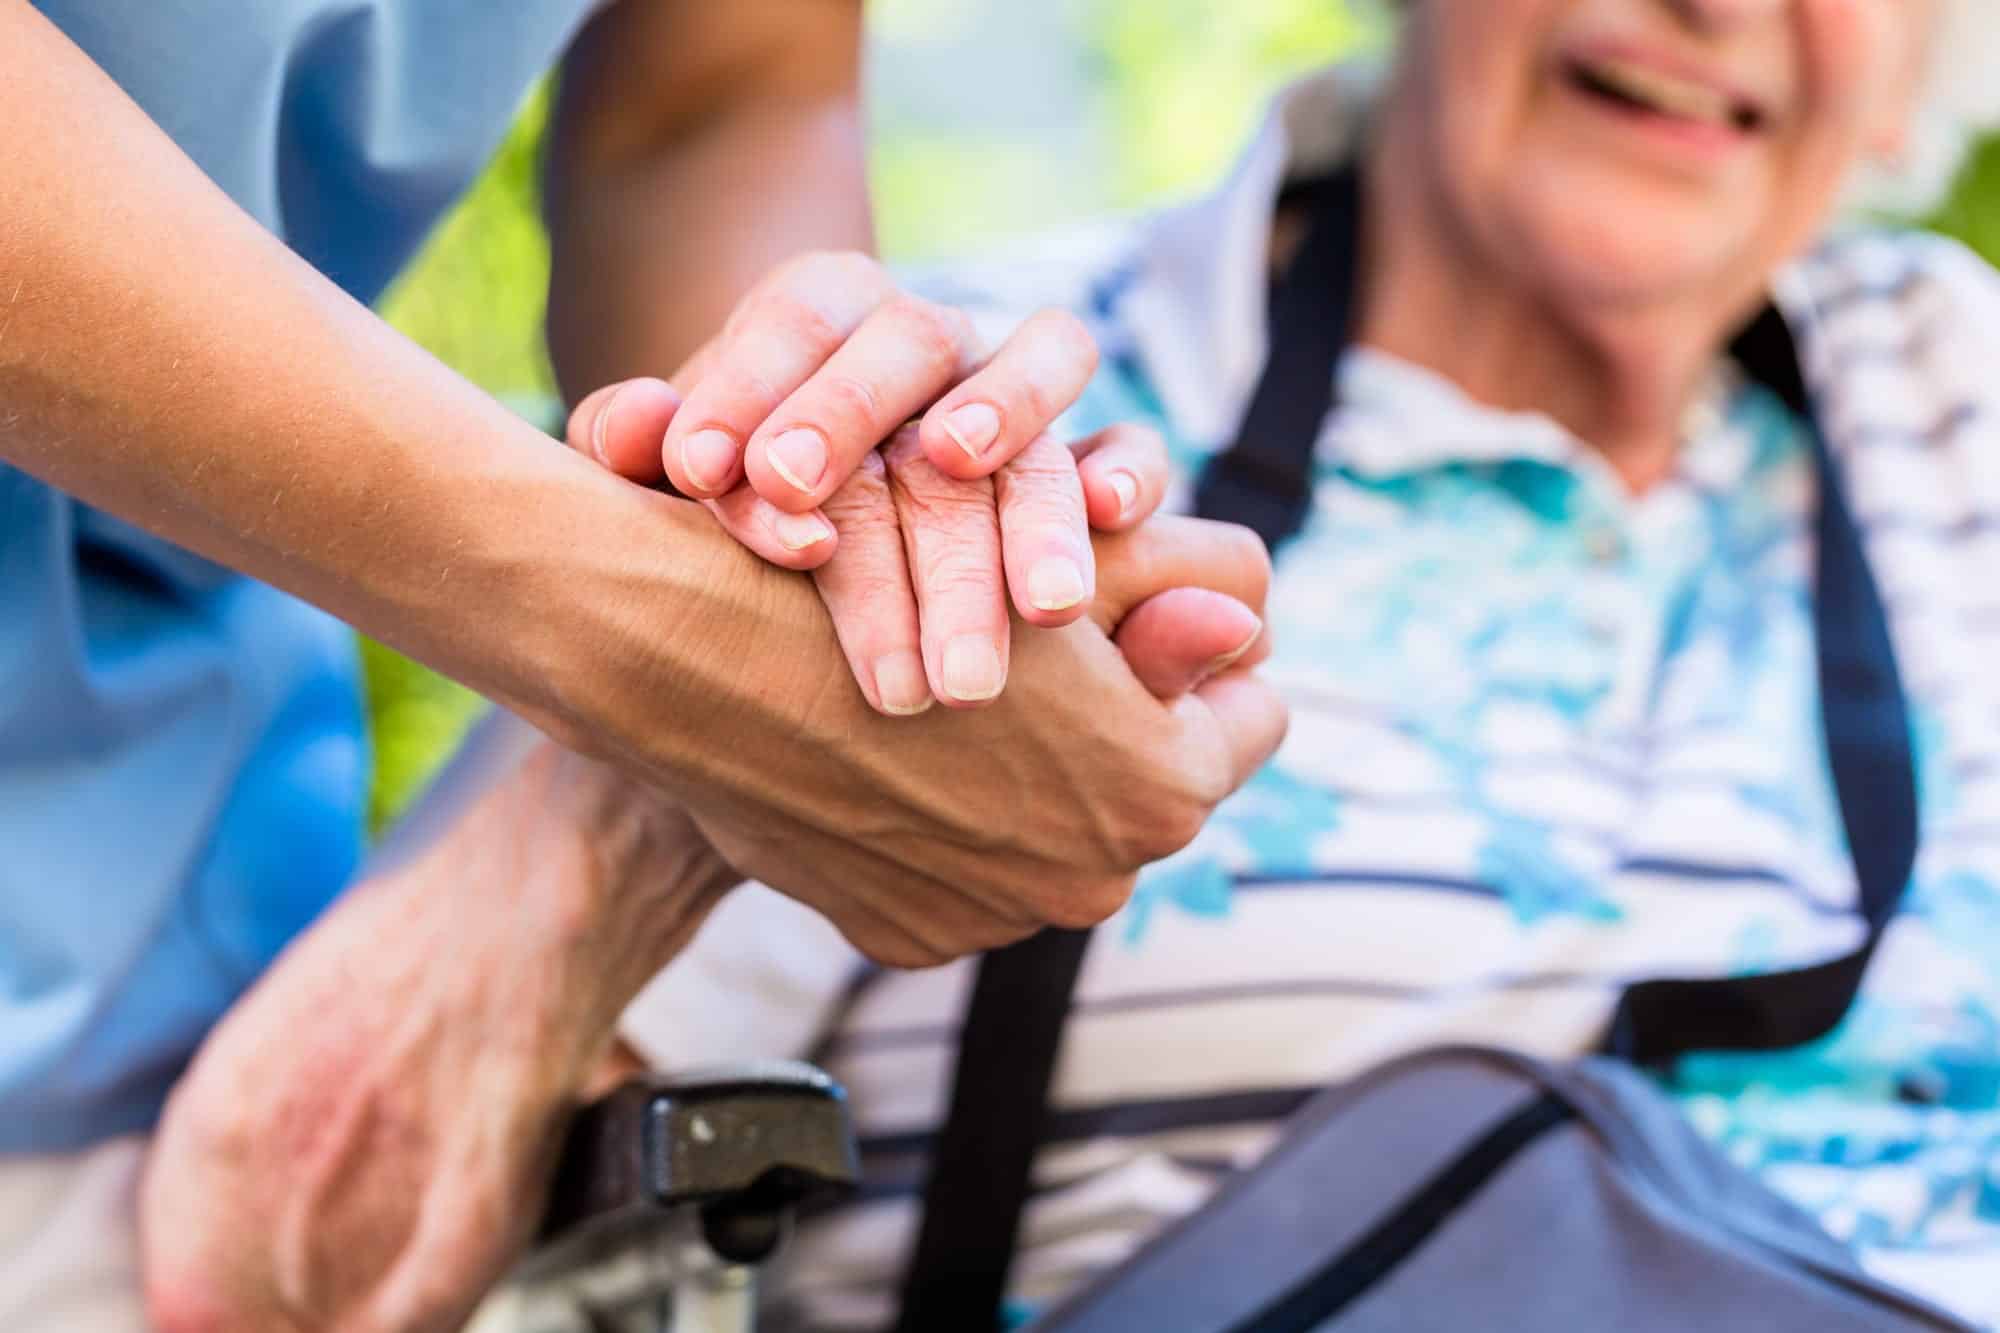 Elderly Care Facilities: What Are the Different Levels of Senior Care?